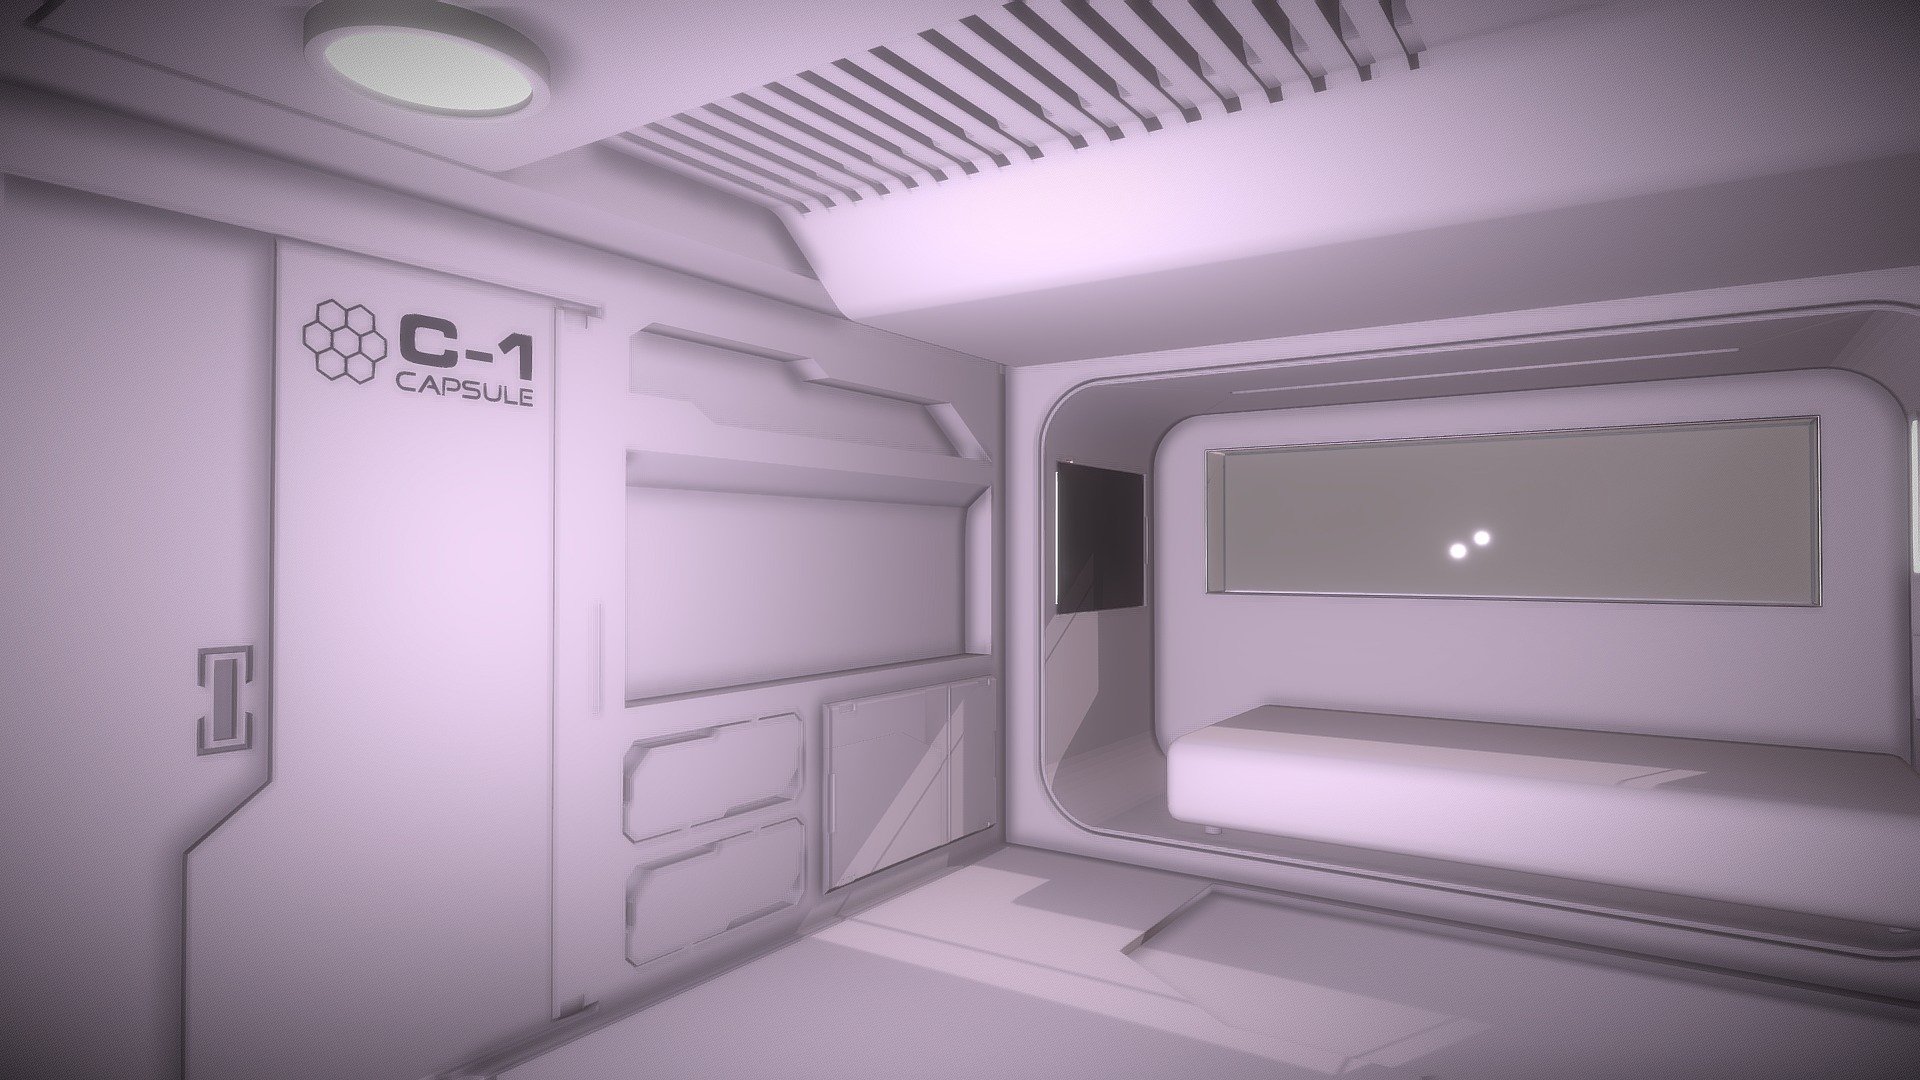 Hello guys! This is a simple sci-fi interior room. Refreshing myself with some hard surface modelling in blender. Hope you like it 3d model